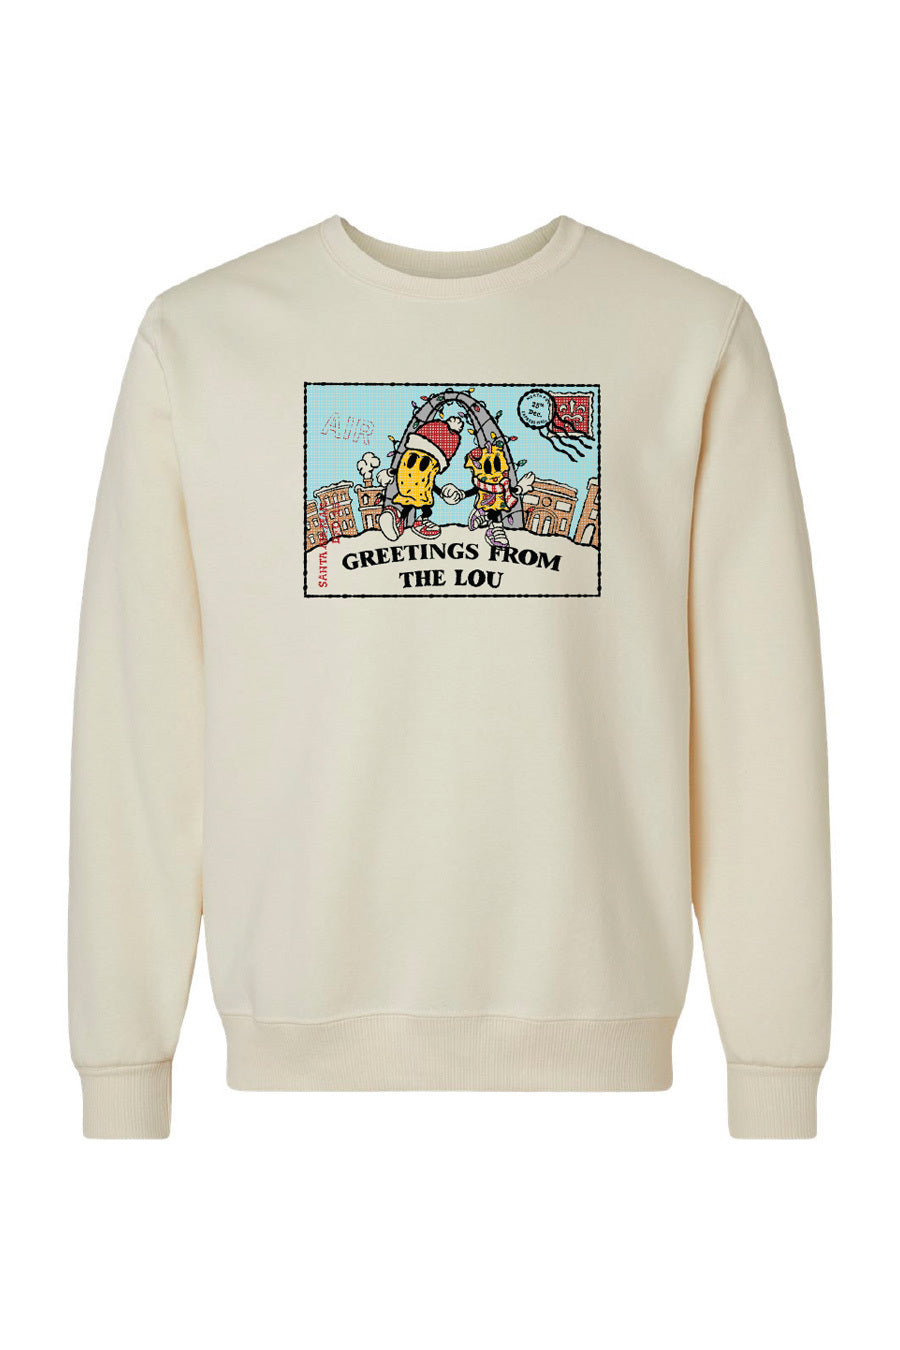 Greetings From The Lou Crewneck